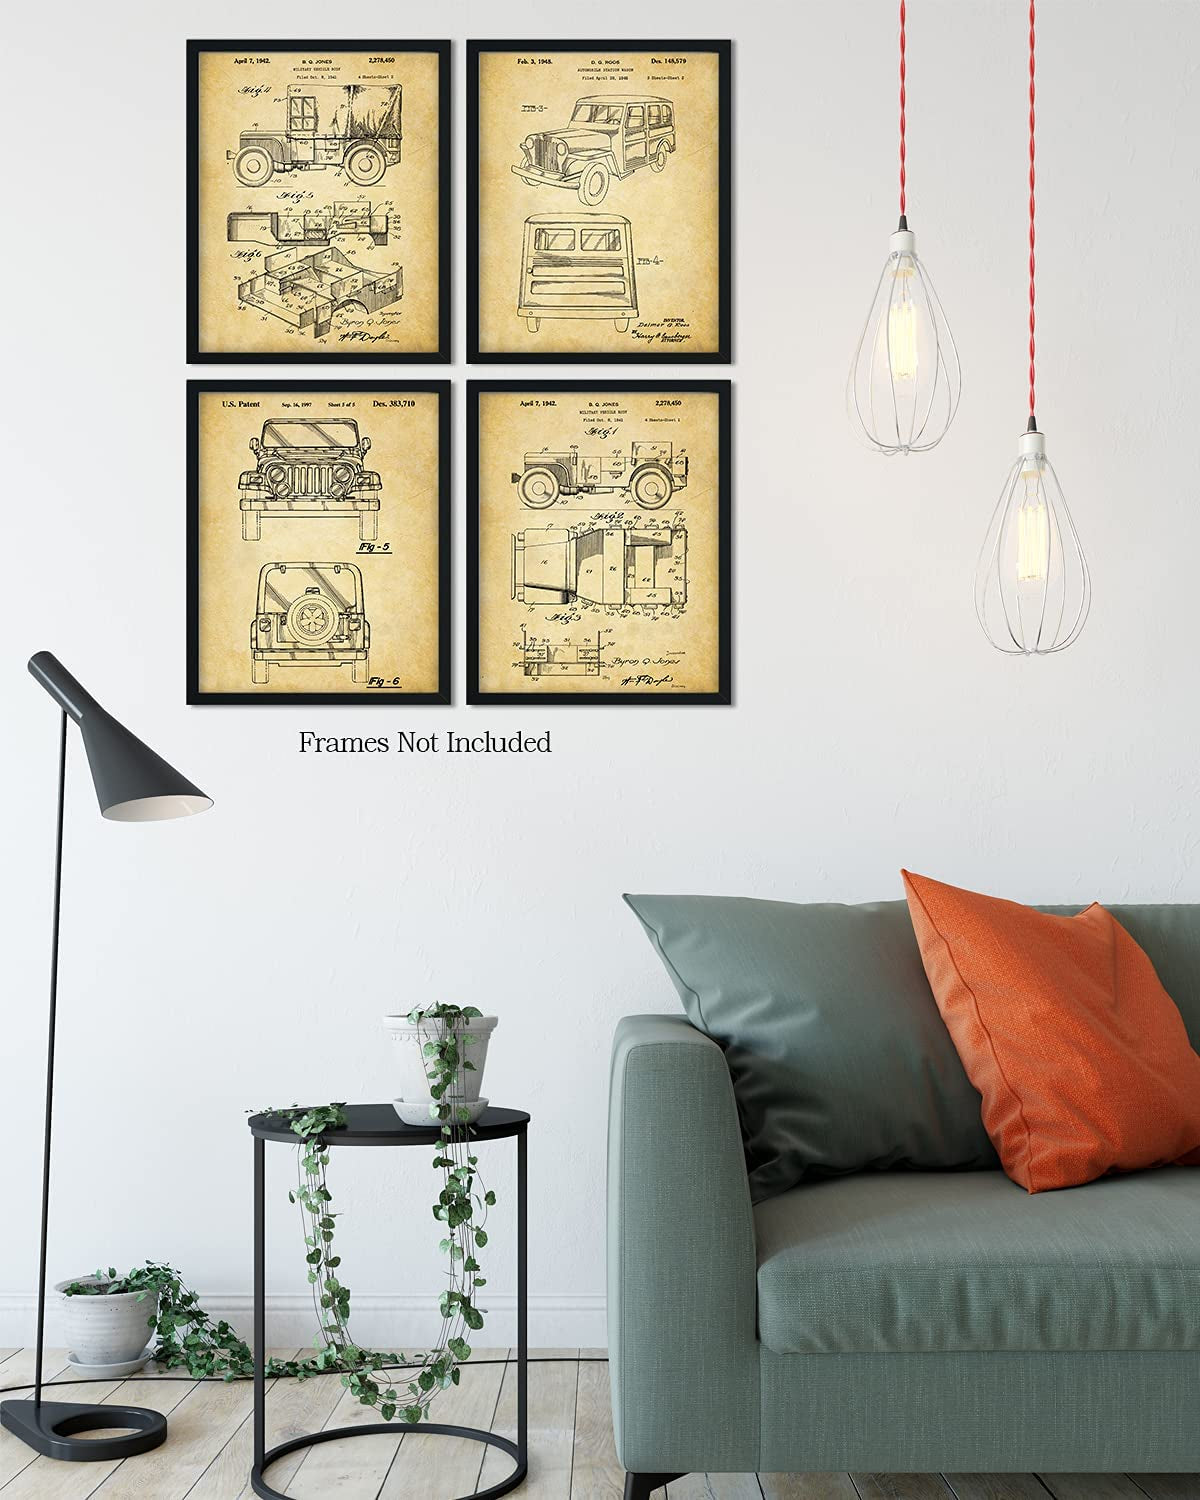 Jeep Patents - a Set of Four Jeep Patents Wall Art Decor Prints with Sepia Backgrounds - Unframed Artwork Printed on Photograph Paper